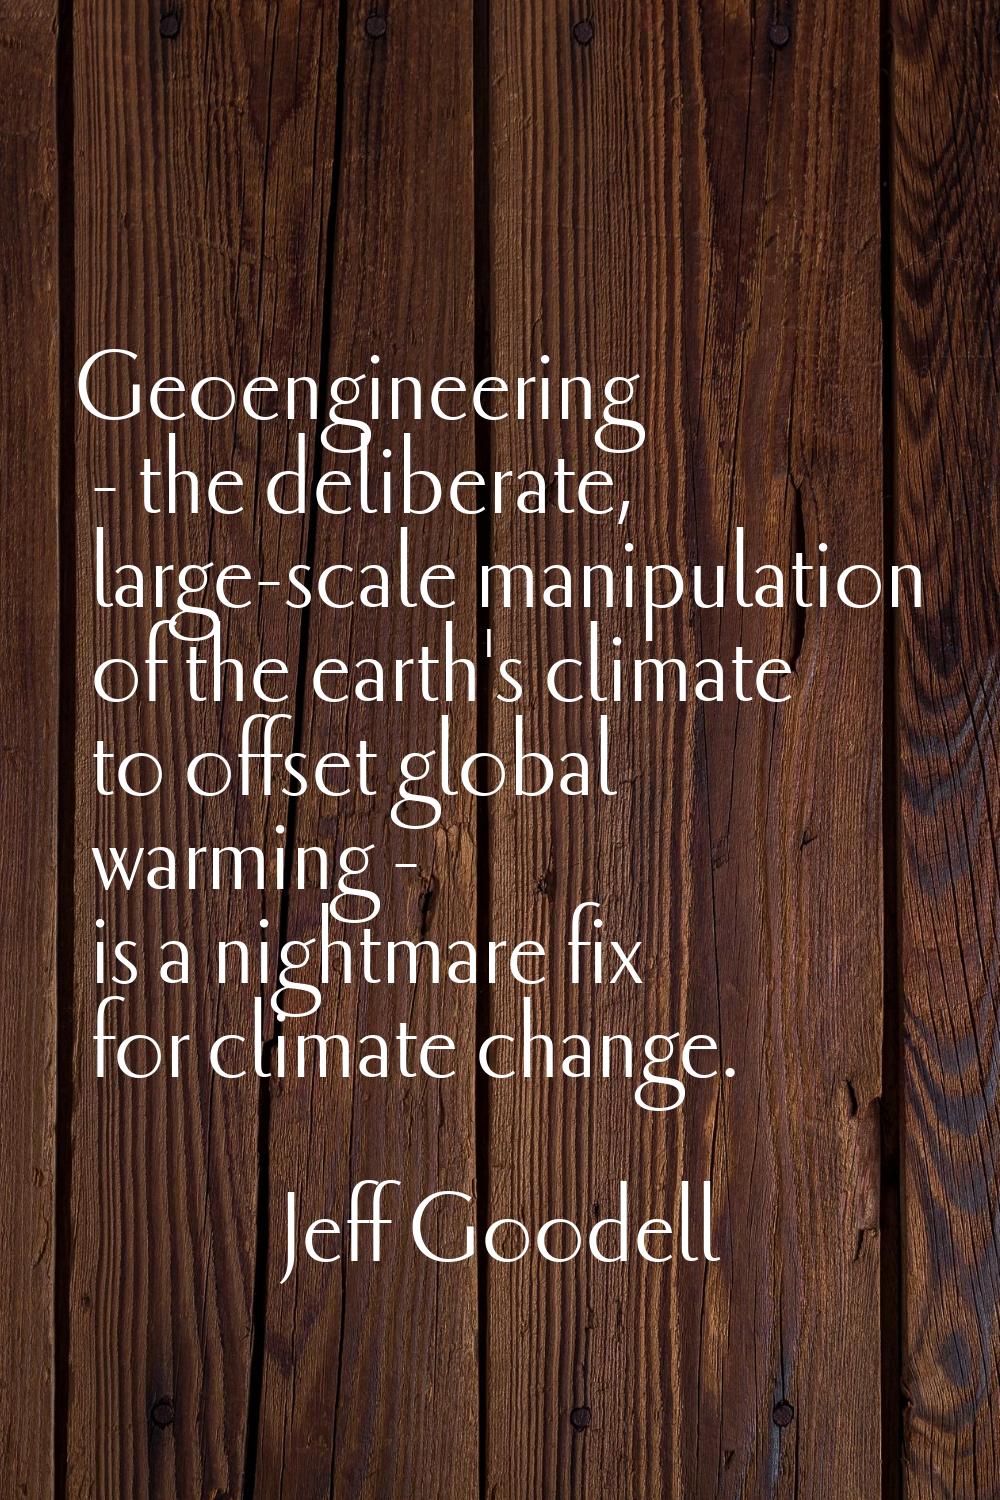 Geoengineering - the deliberate, large-scale manipulation of the earth's climate to offset global w